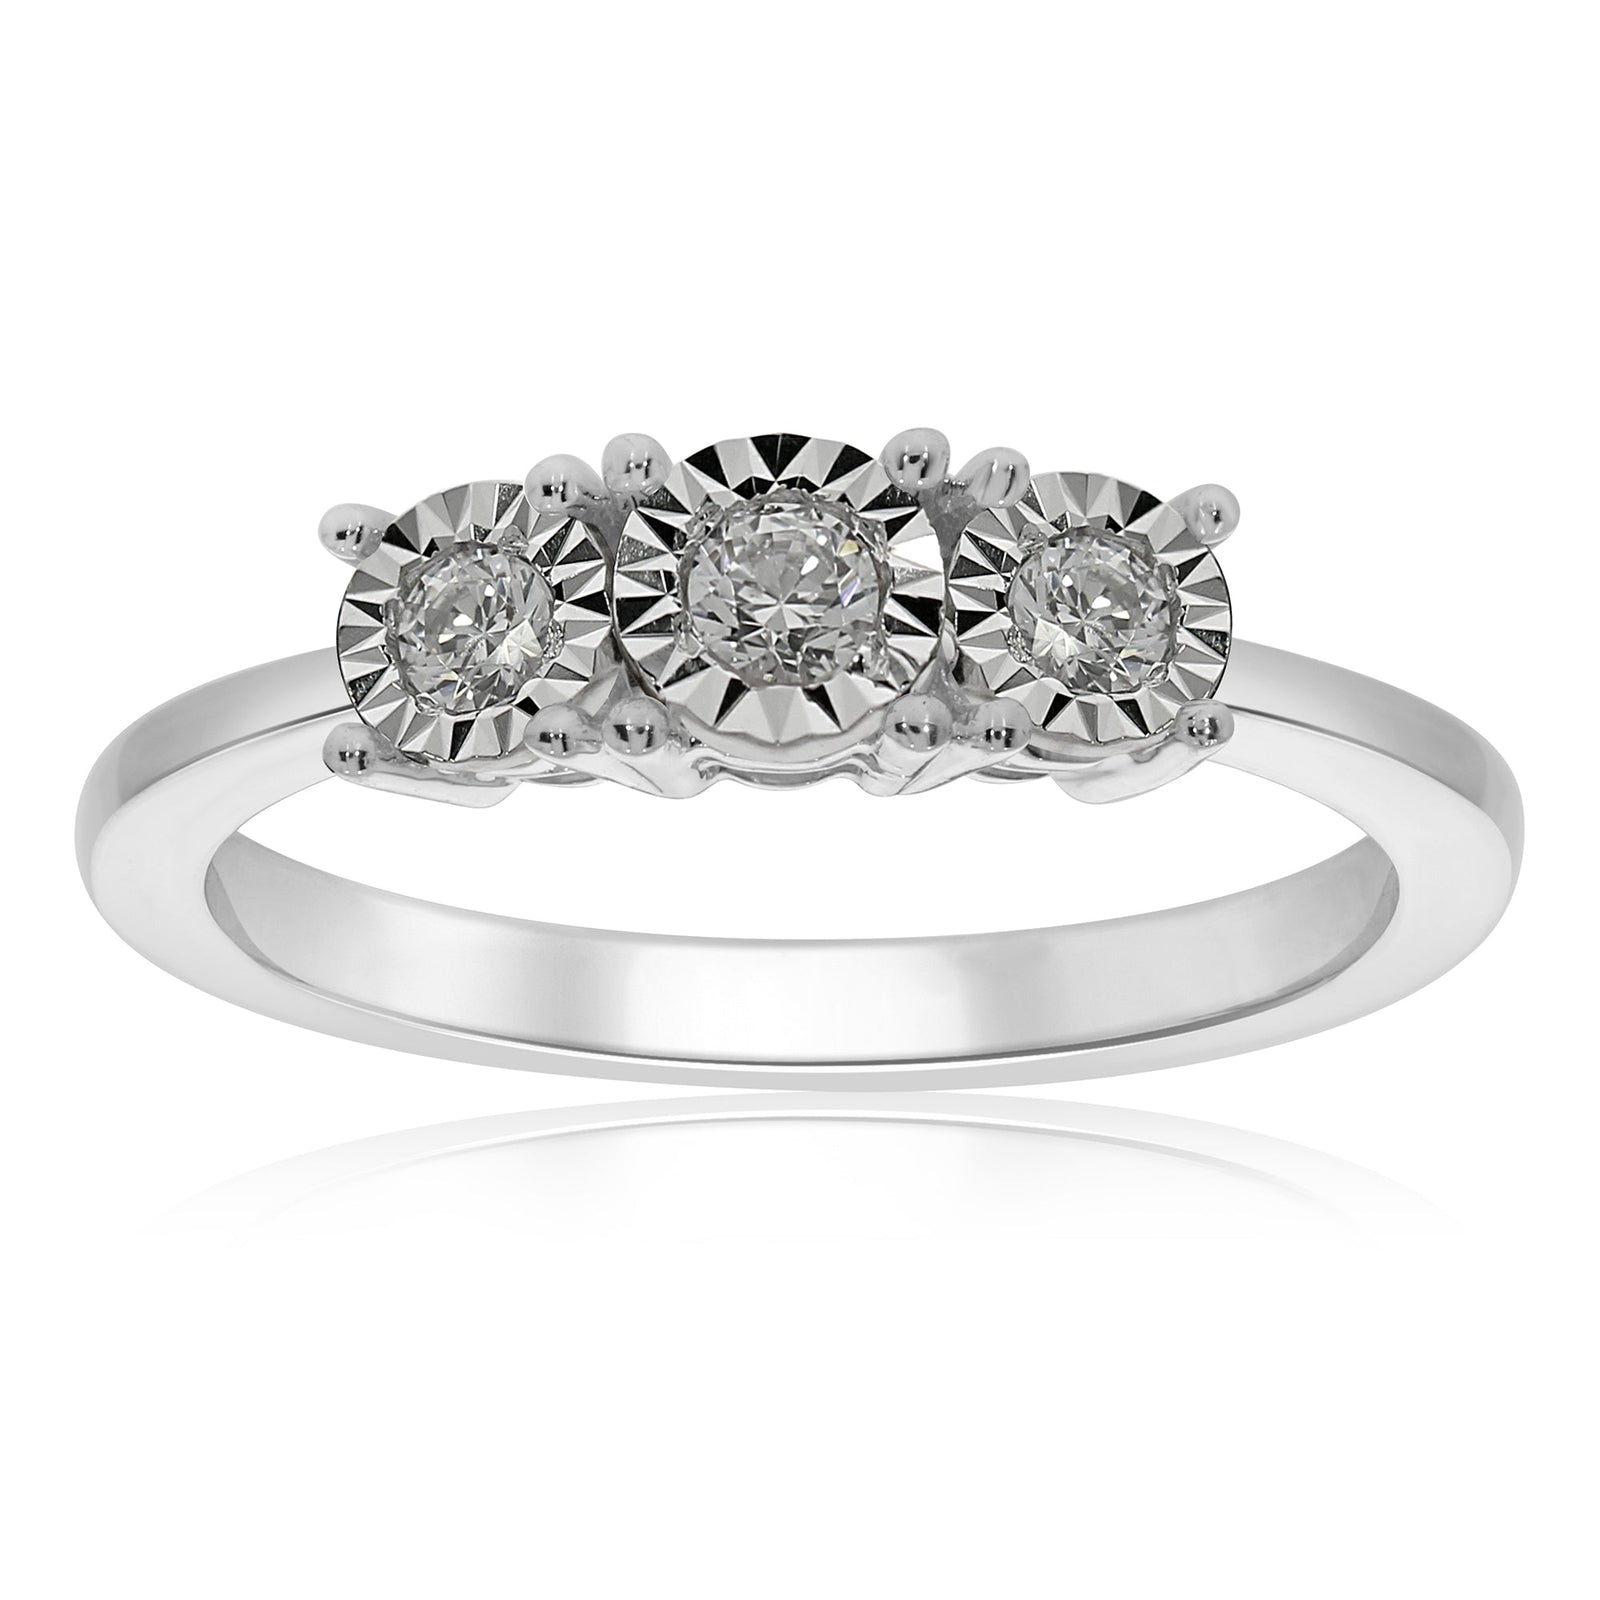 9ct white gold 3 stone miracle plate diamond ring 0.25ct